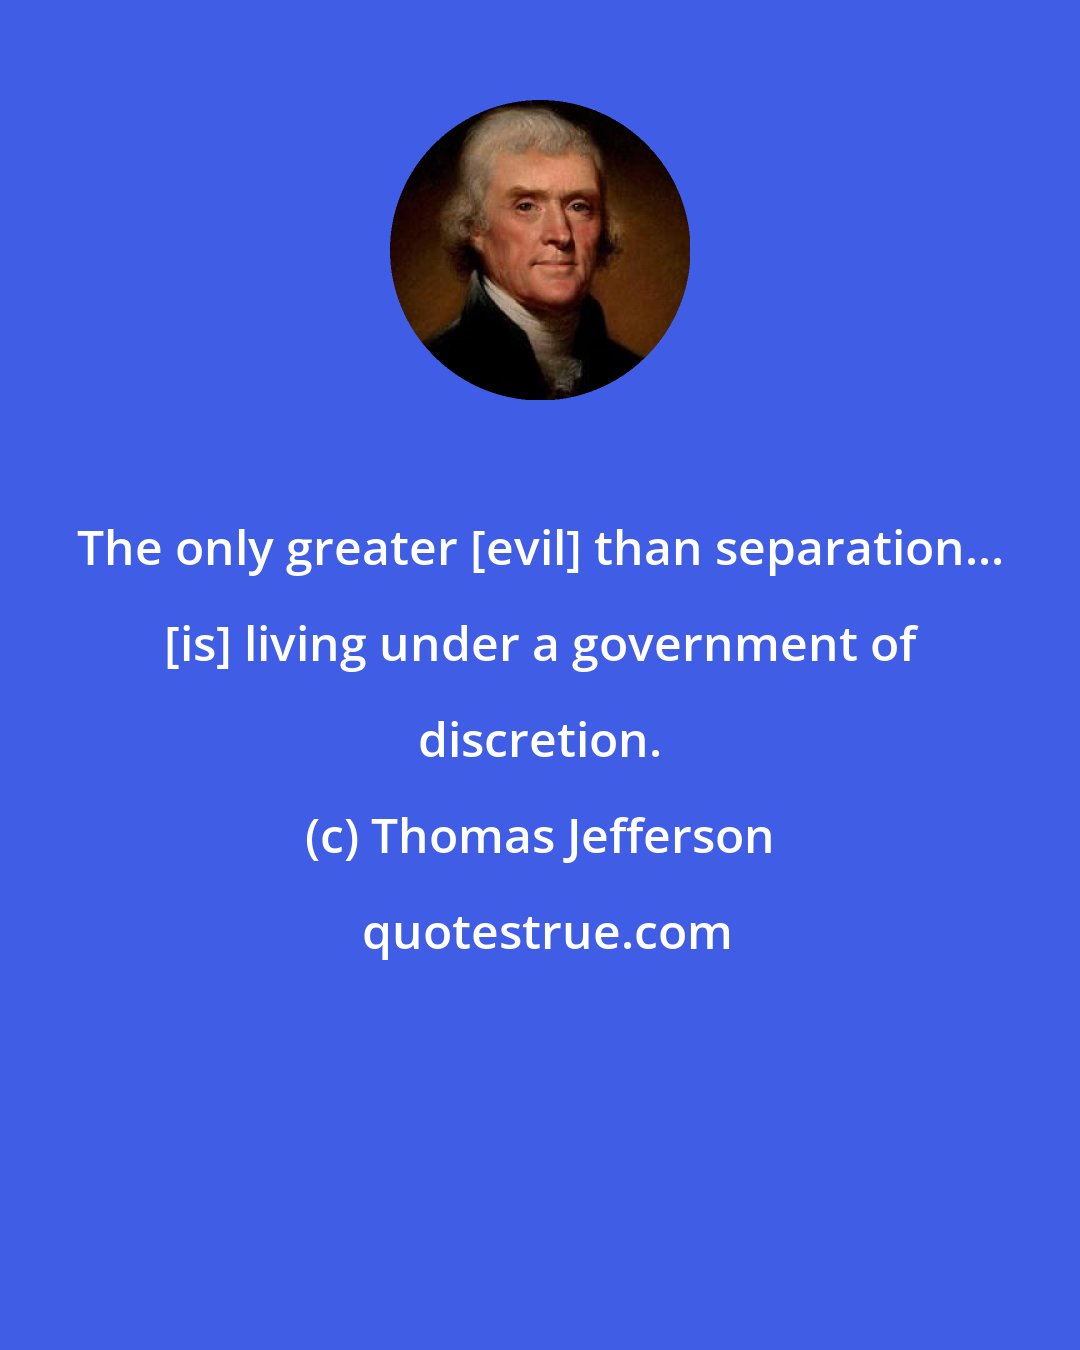 Thomas Jefferson: The only greater [evil] than separation... [is] living under a government of discretion.